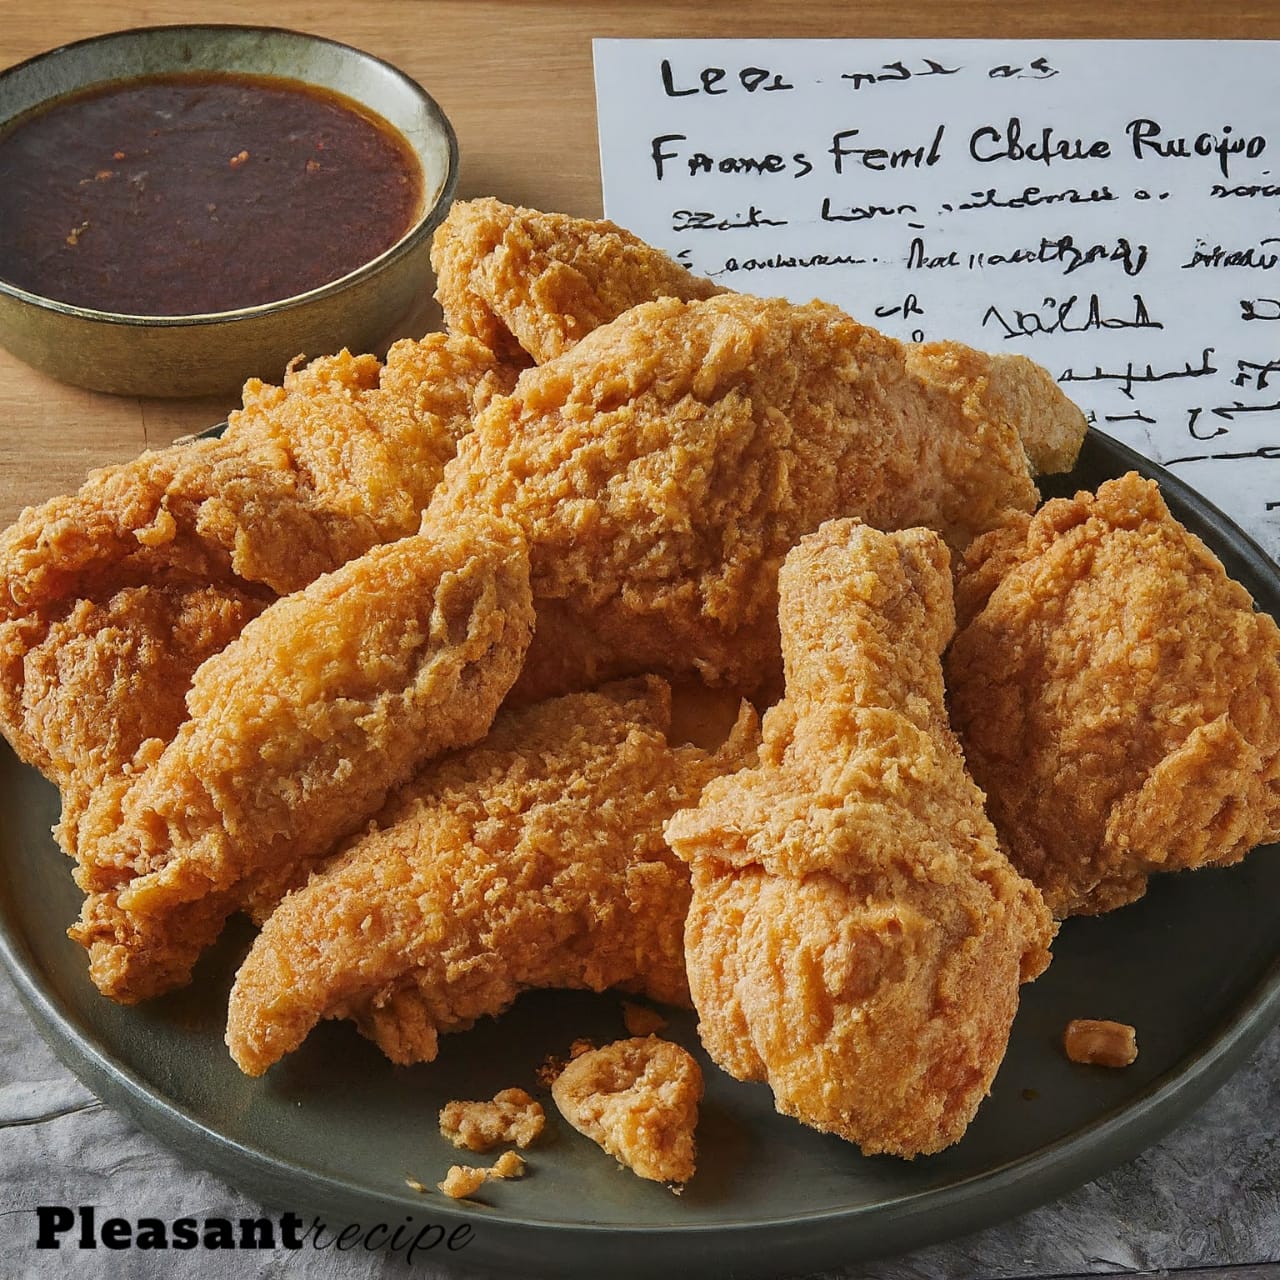 Lee's Famous Chicken Recipe